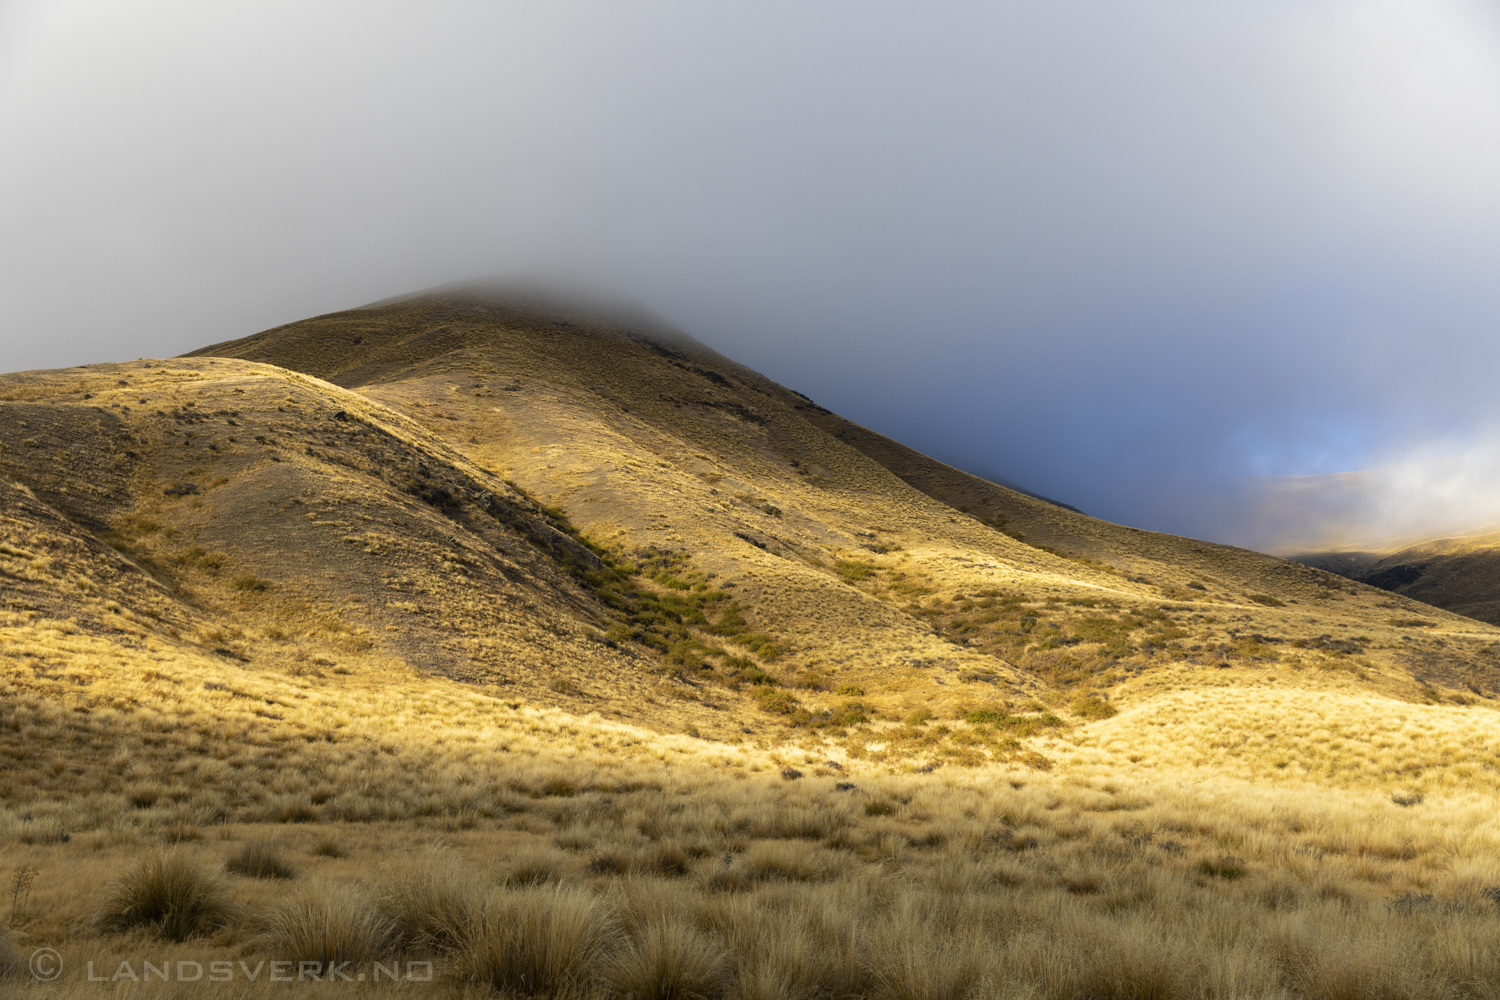 Lindis Valley, New Zealand. 

(Canon EOS 5D Mark IV / Canon EF 24-70mm f/2.8 L II USM)